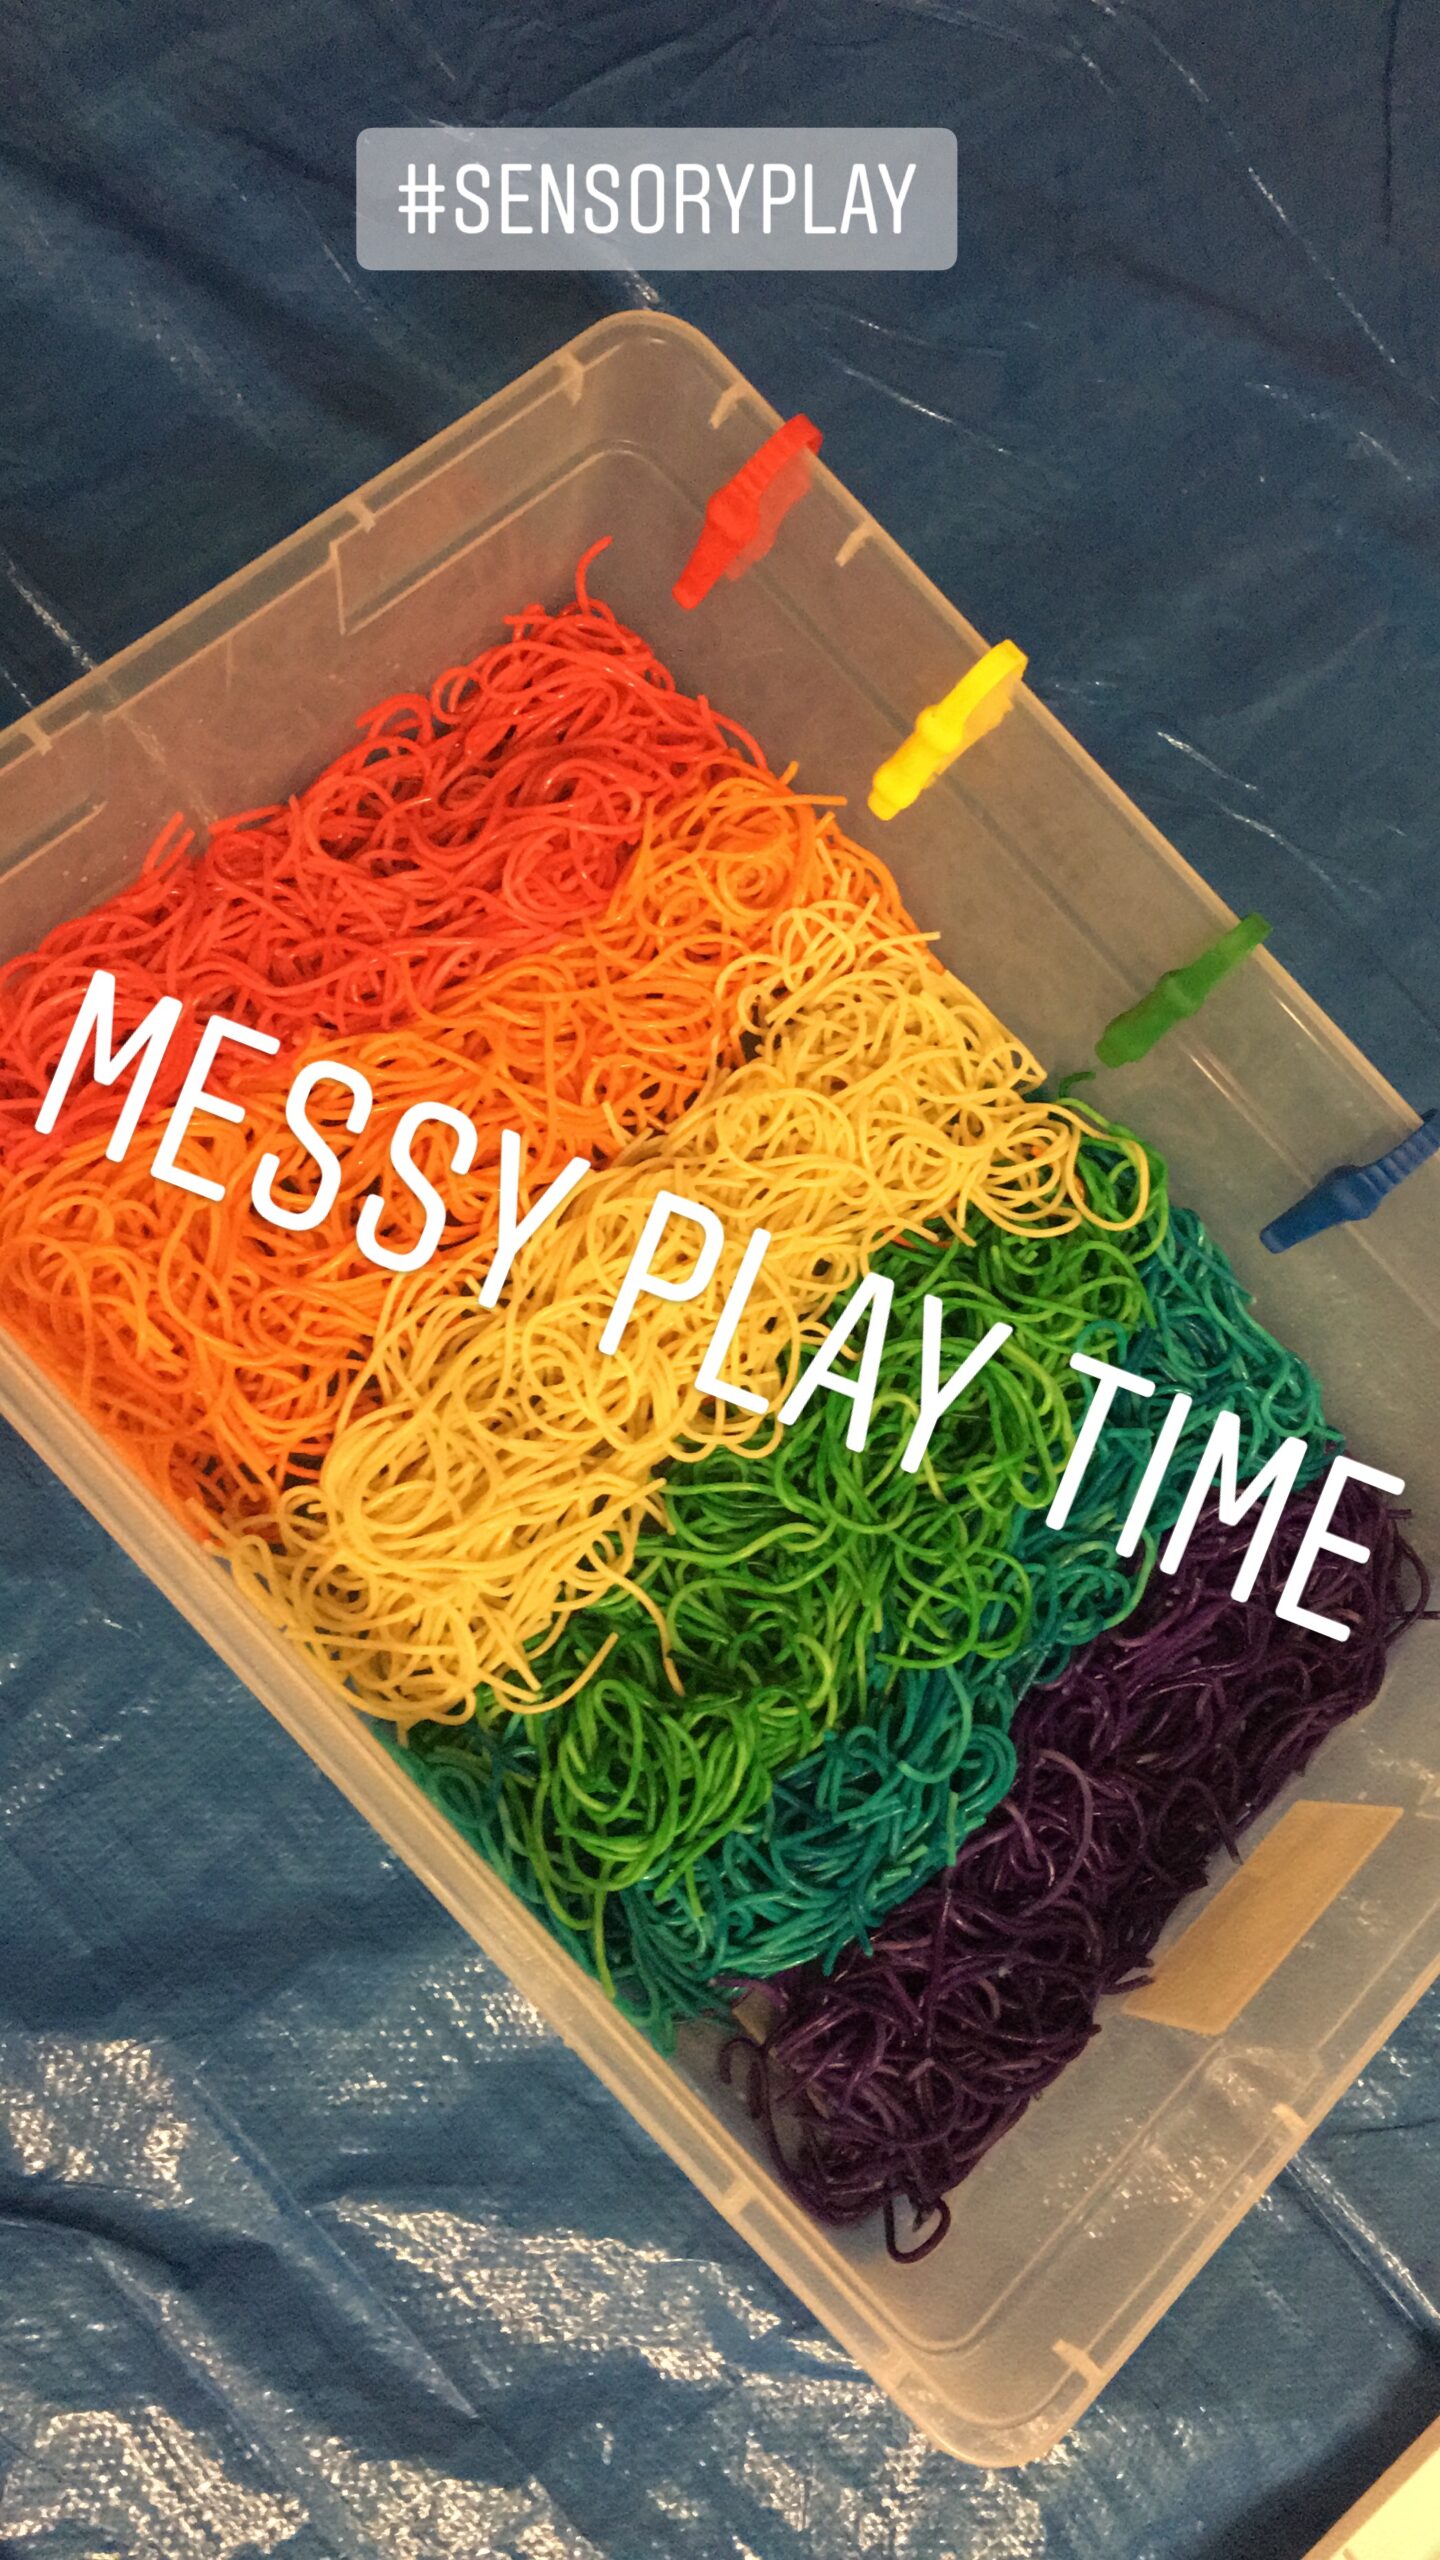 This simple Rainbow sensory bin is great for color recognition, increasing fine motor skills, and provides great texture.Rainbow Pasta sensory bins - sensory play is so theraputic for children, great way to increase fine motor skills and provides a safe environment for exploring.